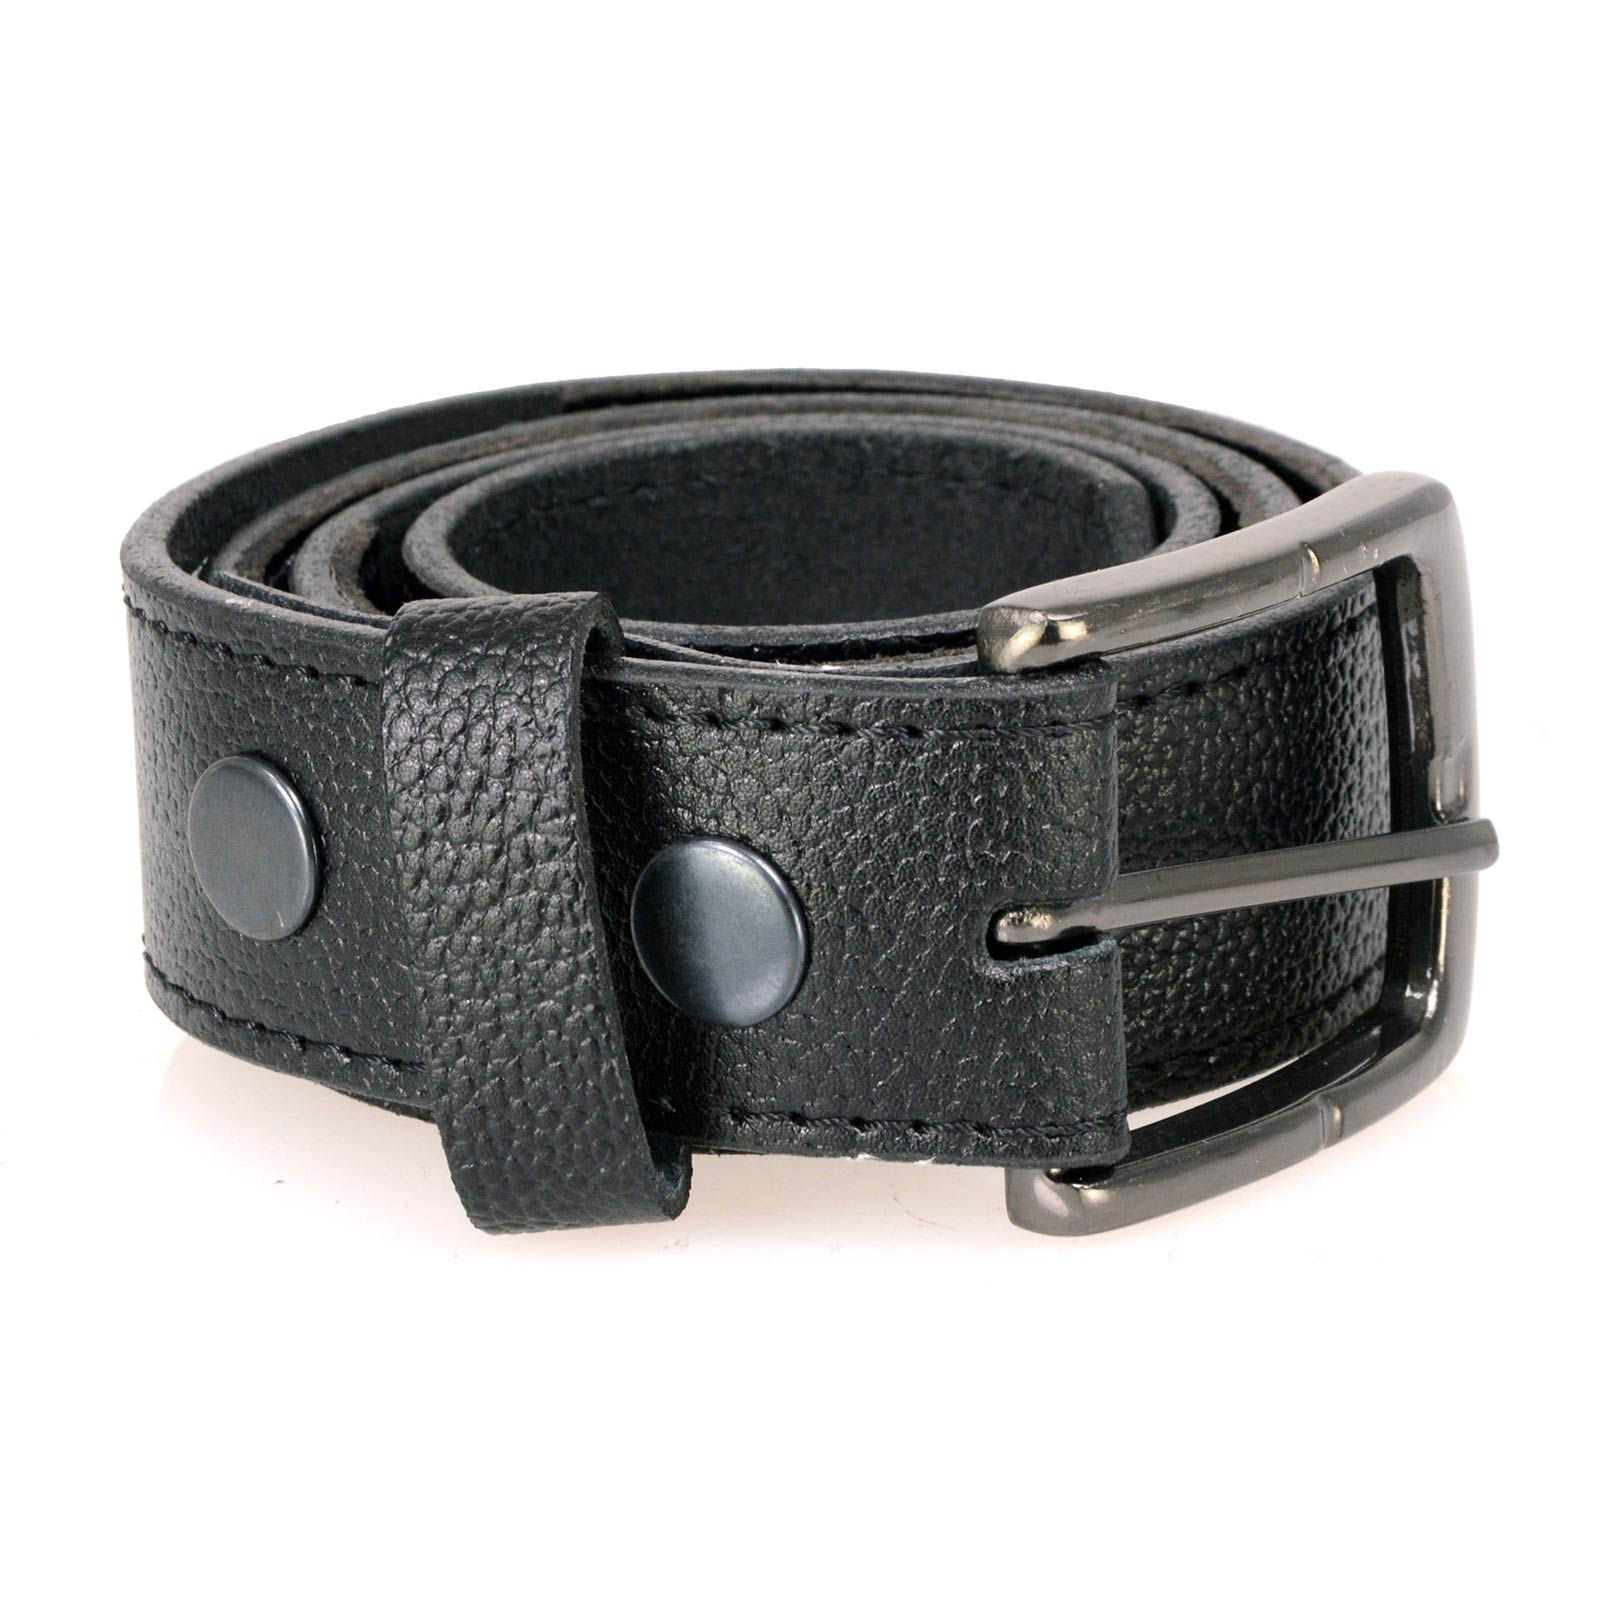 Milwaukee Leather MP7150 Men's Black Genuine Cowhide Leather Money Belt W/ Secure Front Buckle for Motorcycle Rider